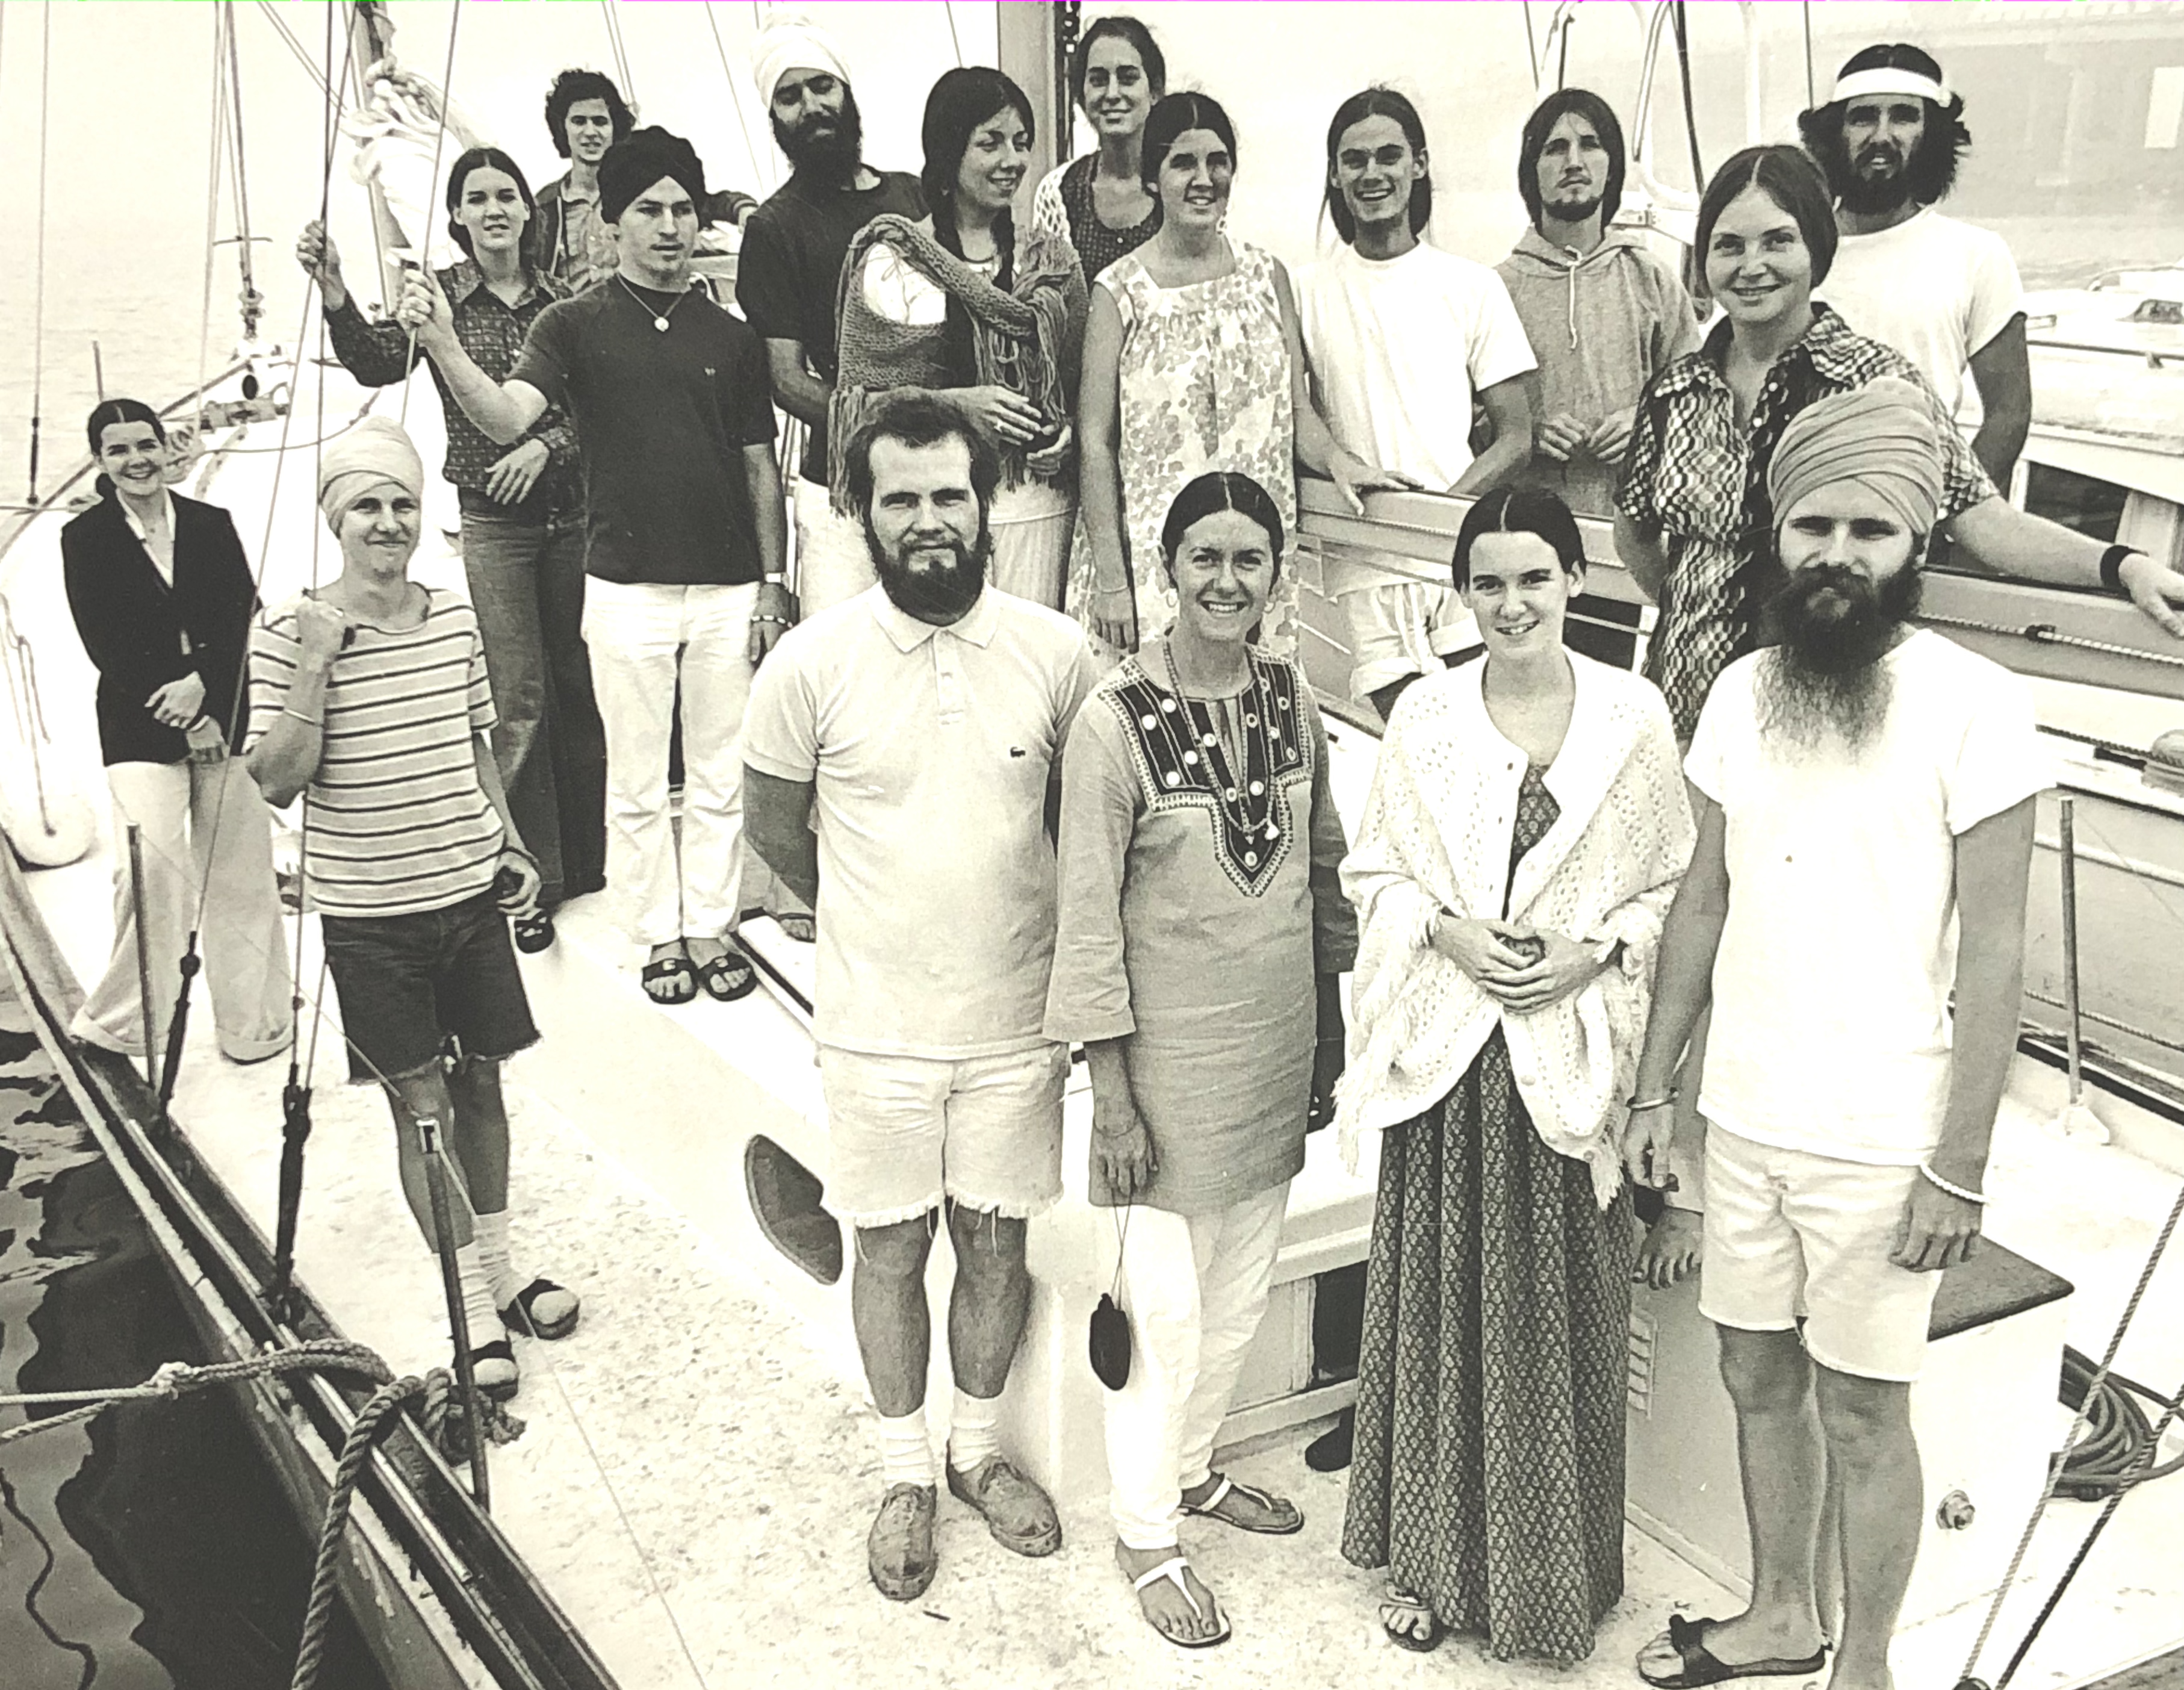 I was thrown out of the ashram